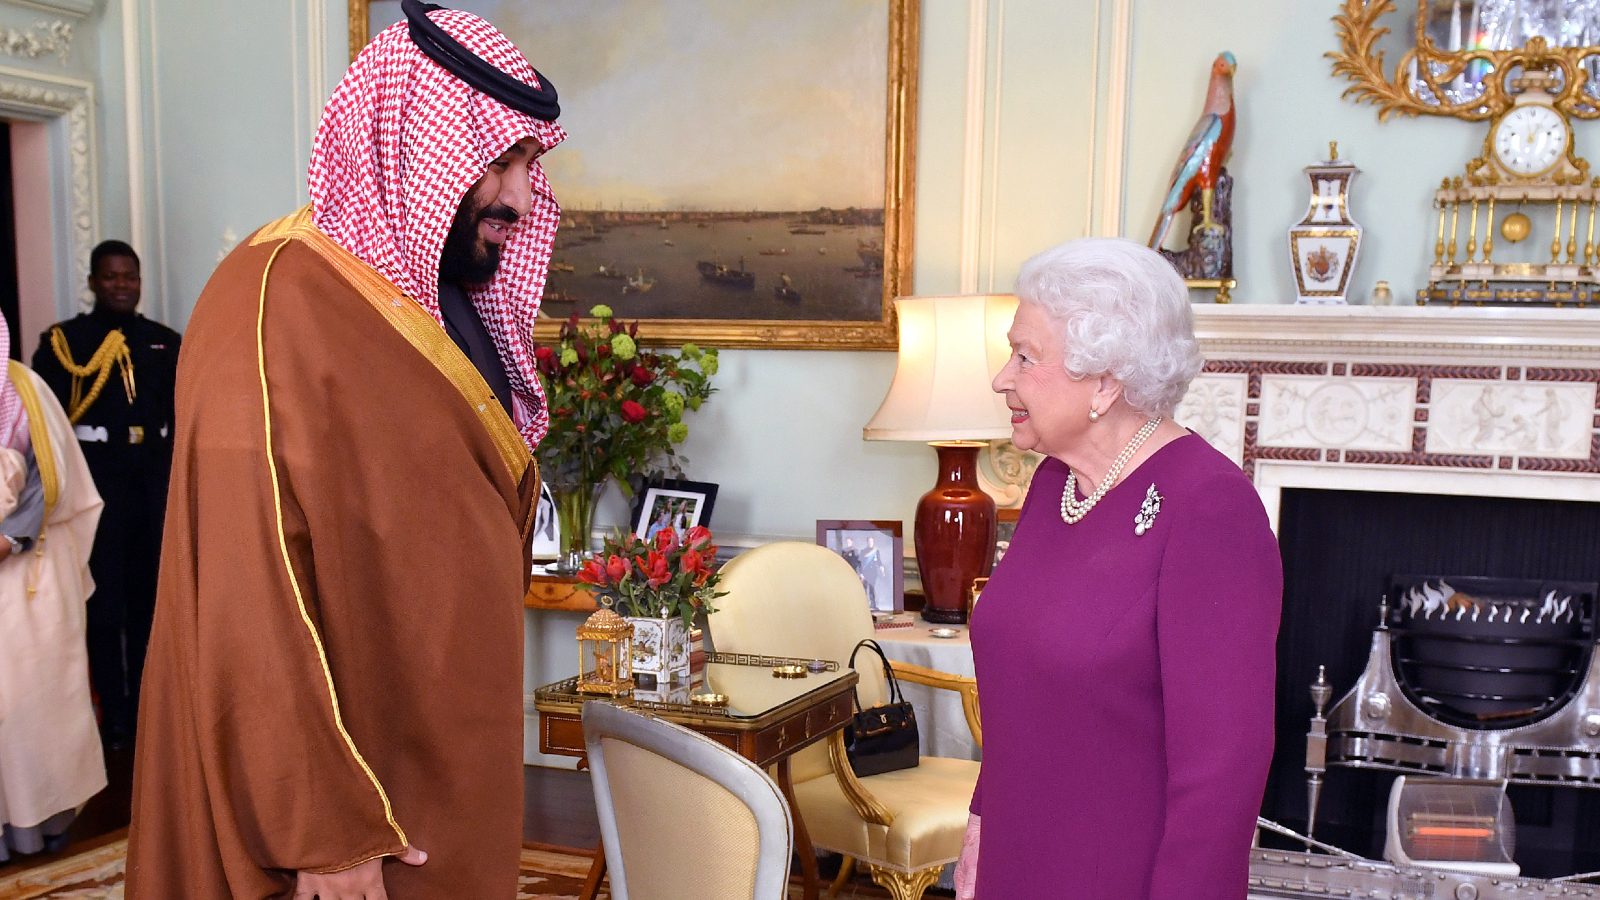 Saudi Prince Mohammed Bin Salman to Travel to London to Deliver Condolences on Queen’s Death